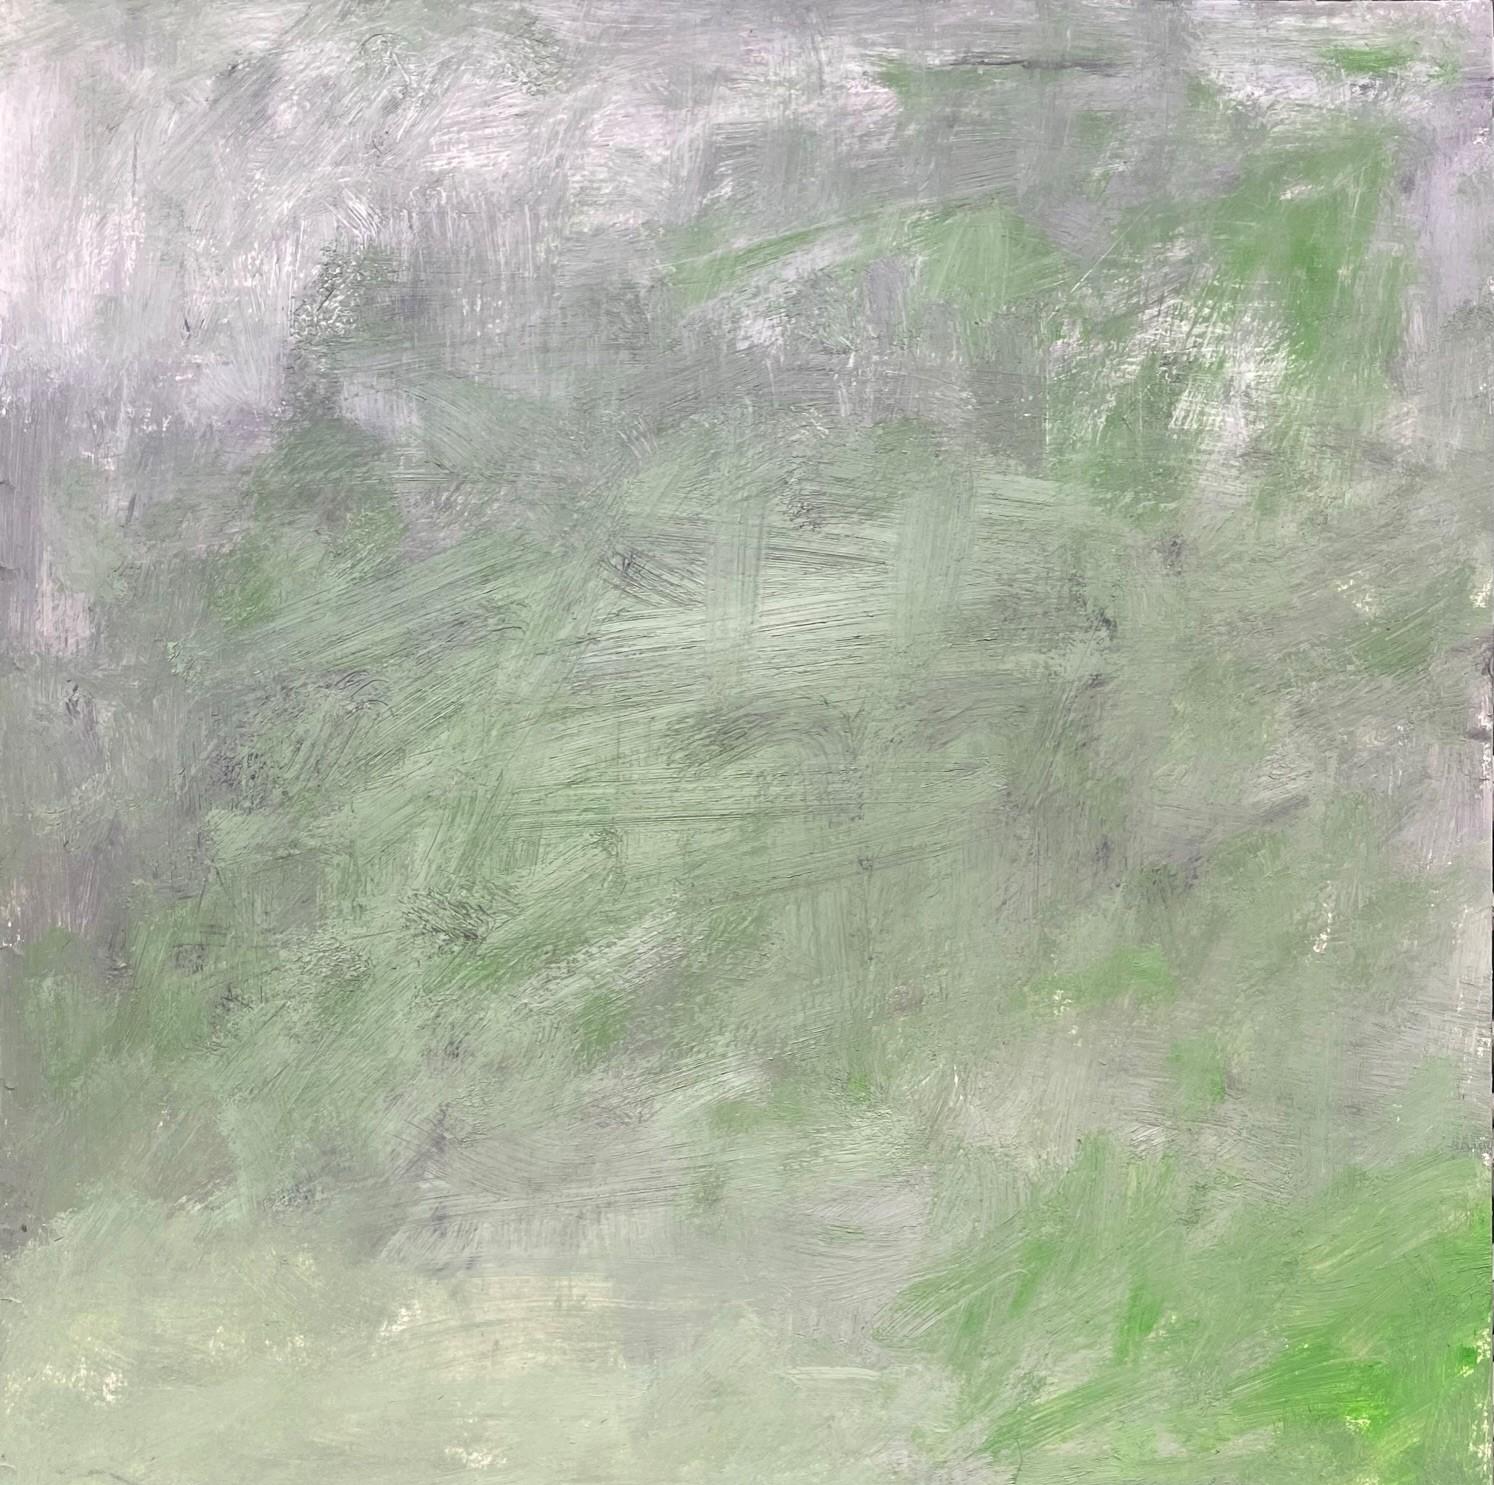 Remains (Body in the Field 15) - Contemporary, Abstract, Green, 21st Century - Art by Zsolt Berszán